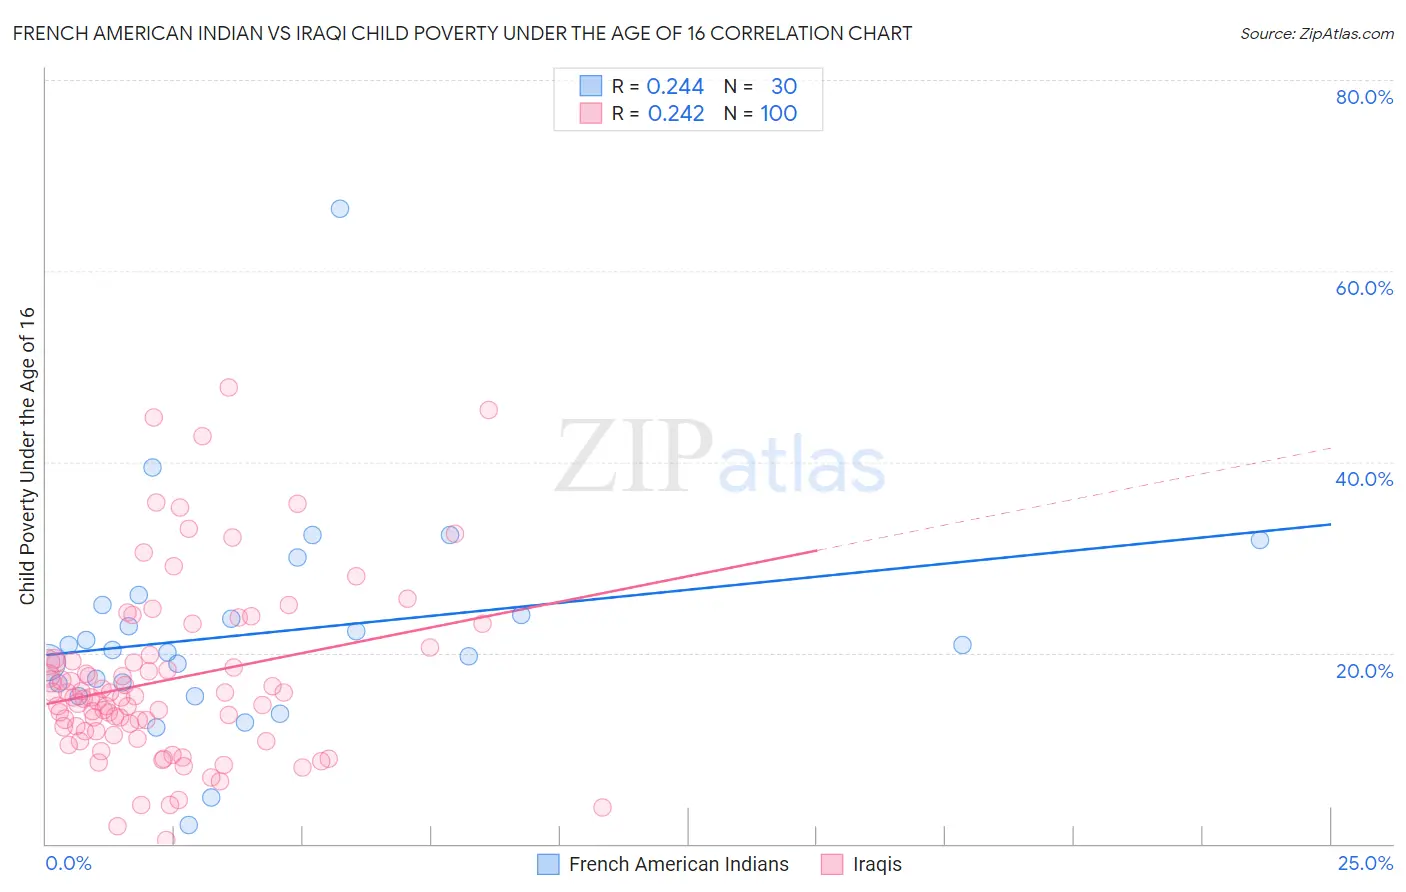 French American Indian vs Iraqi Child Poverty Under the Age of 16